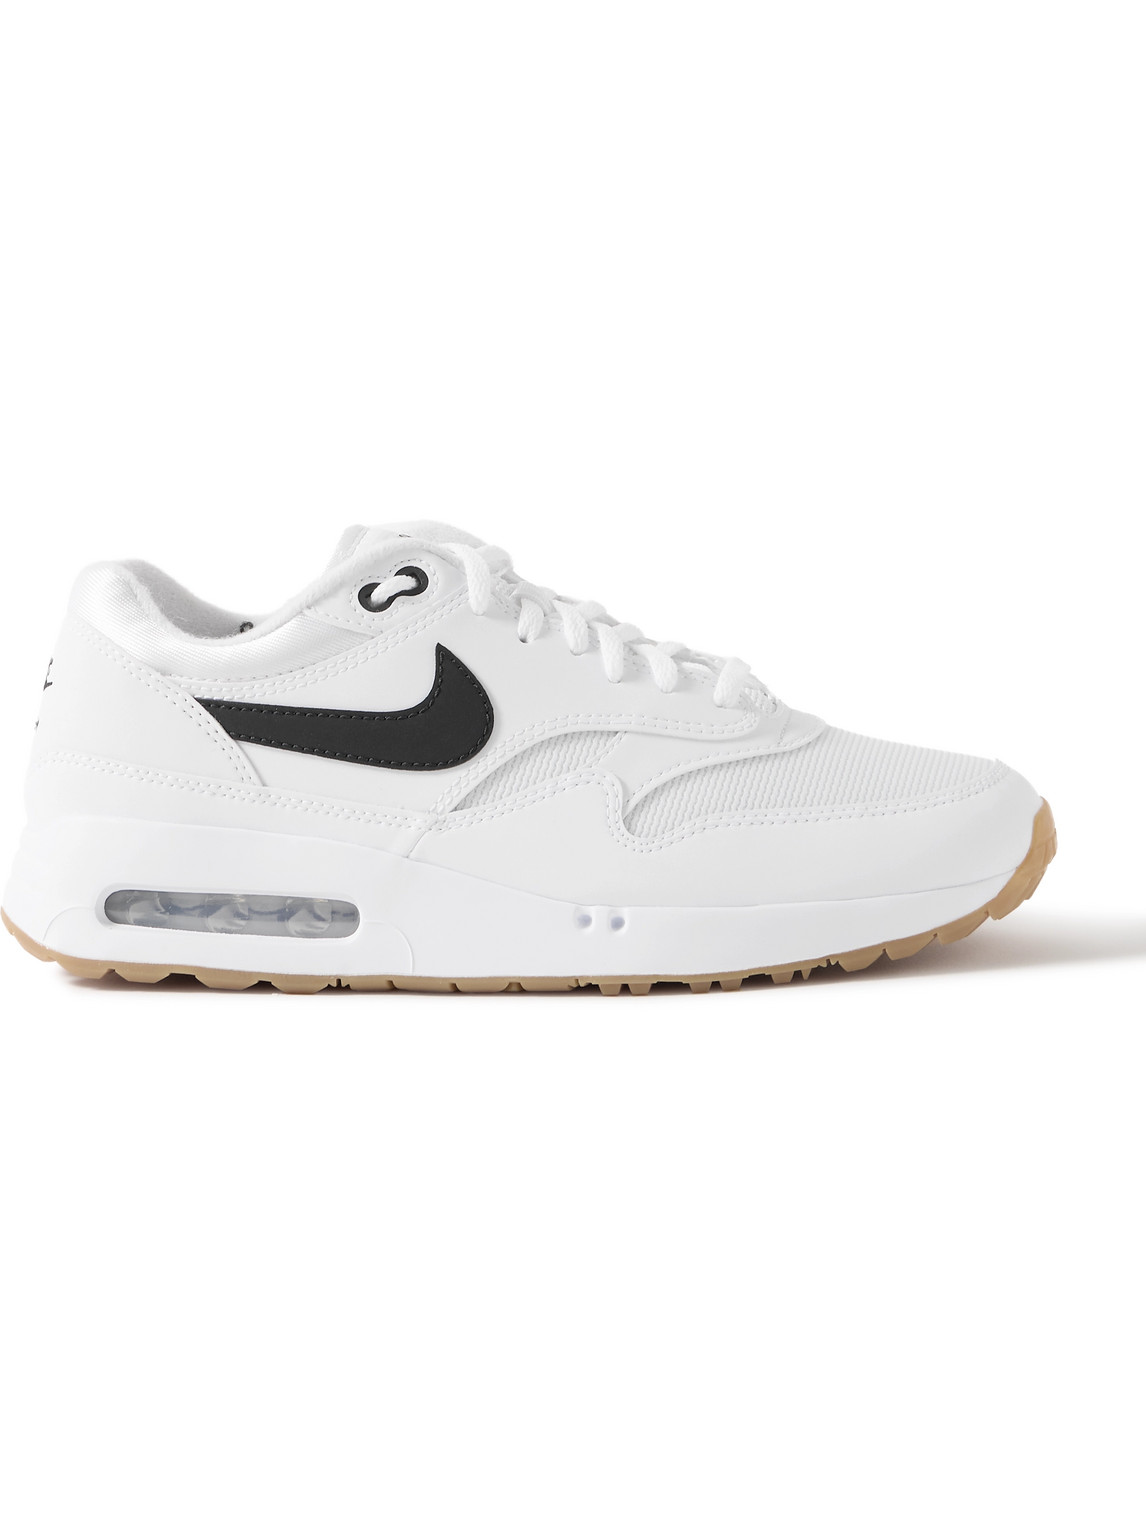 Air Max 1 '86 OG G Leather and Mesh Golf Sneakers